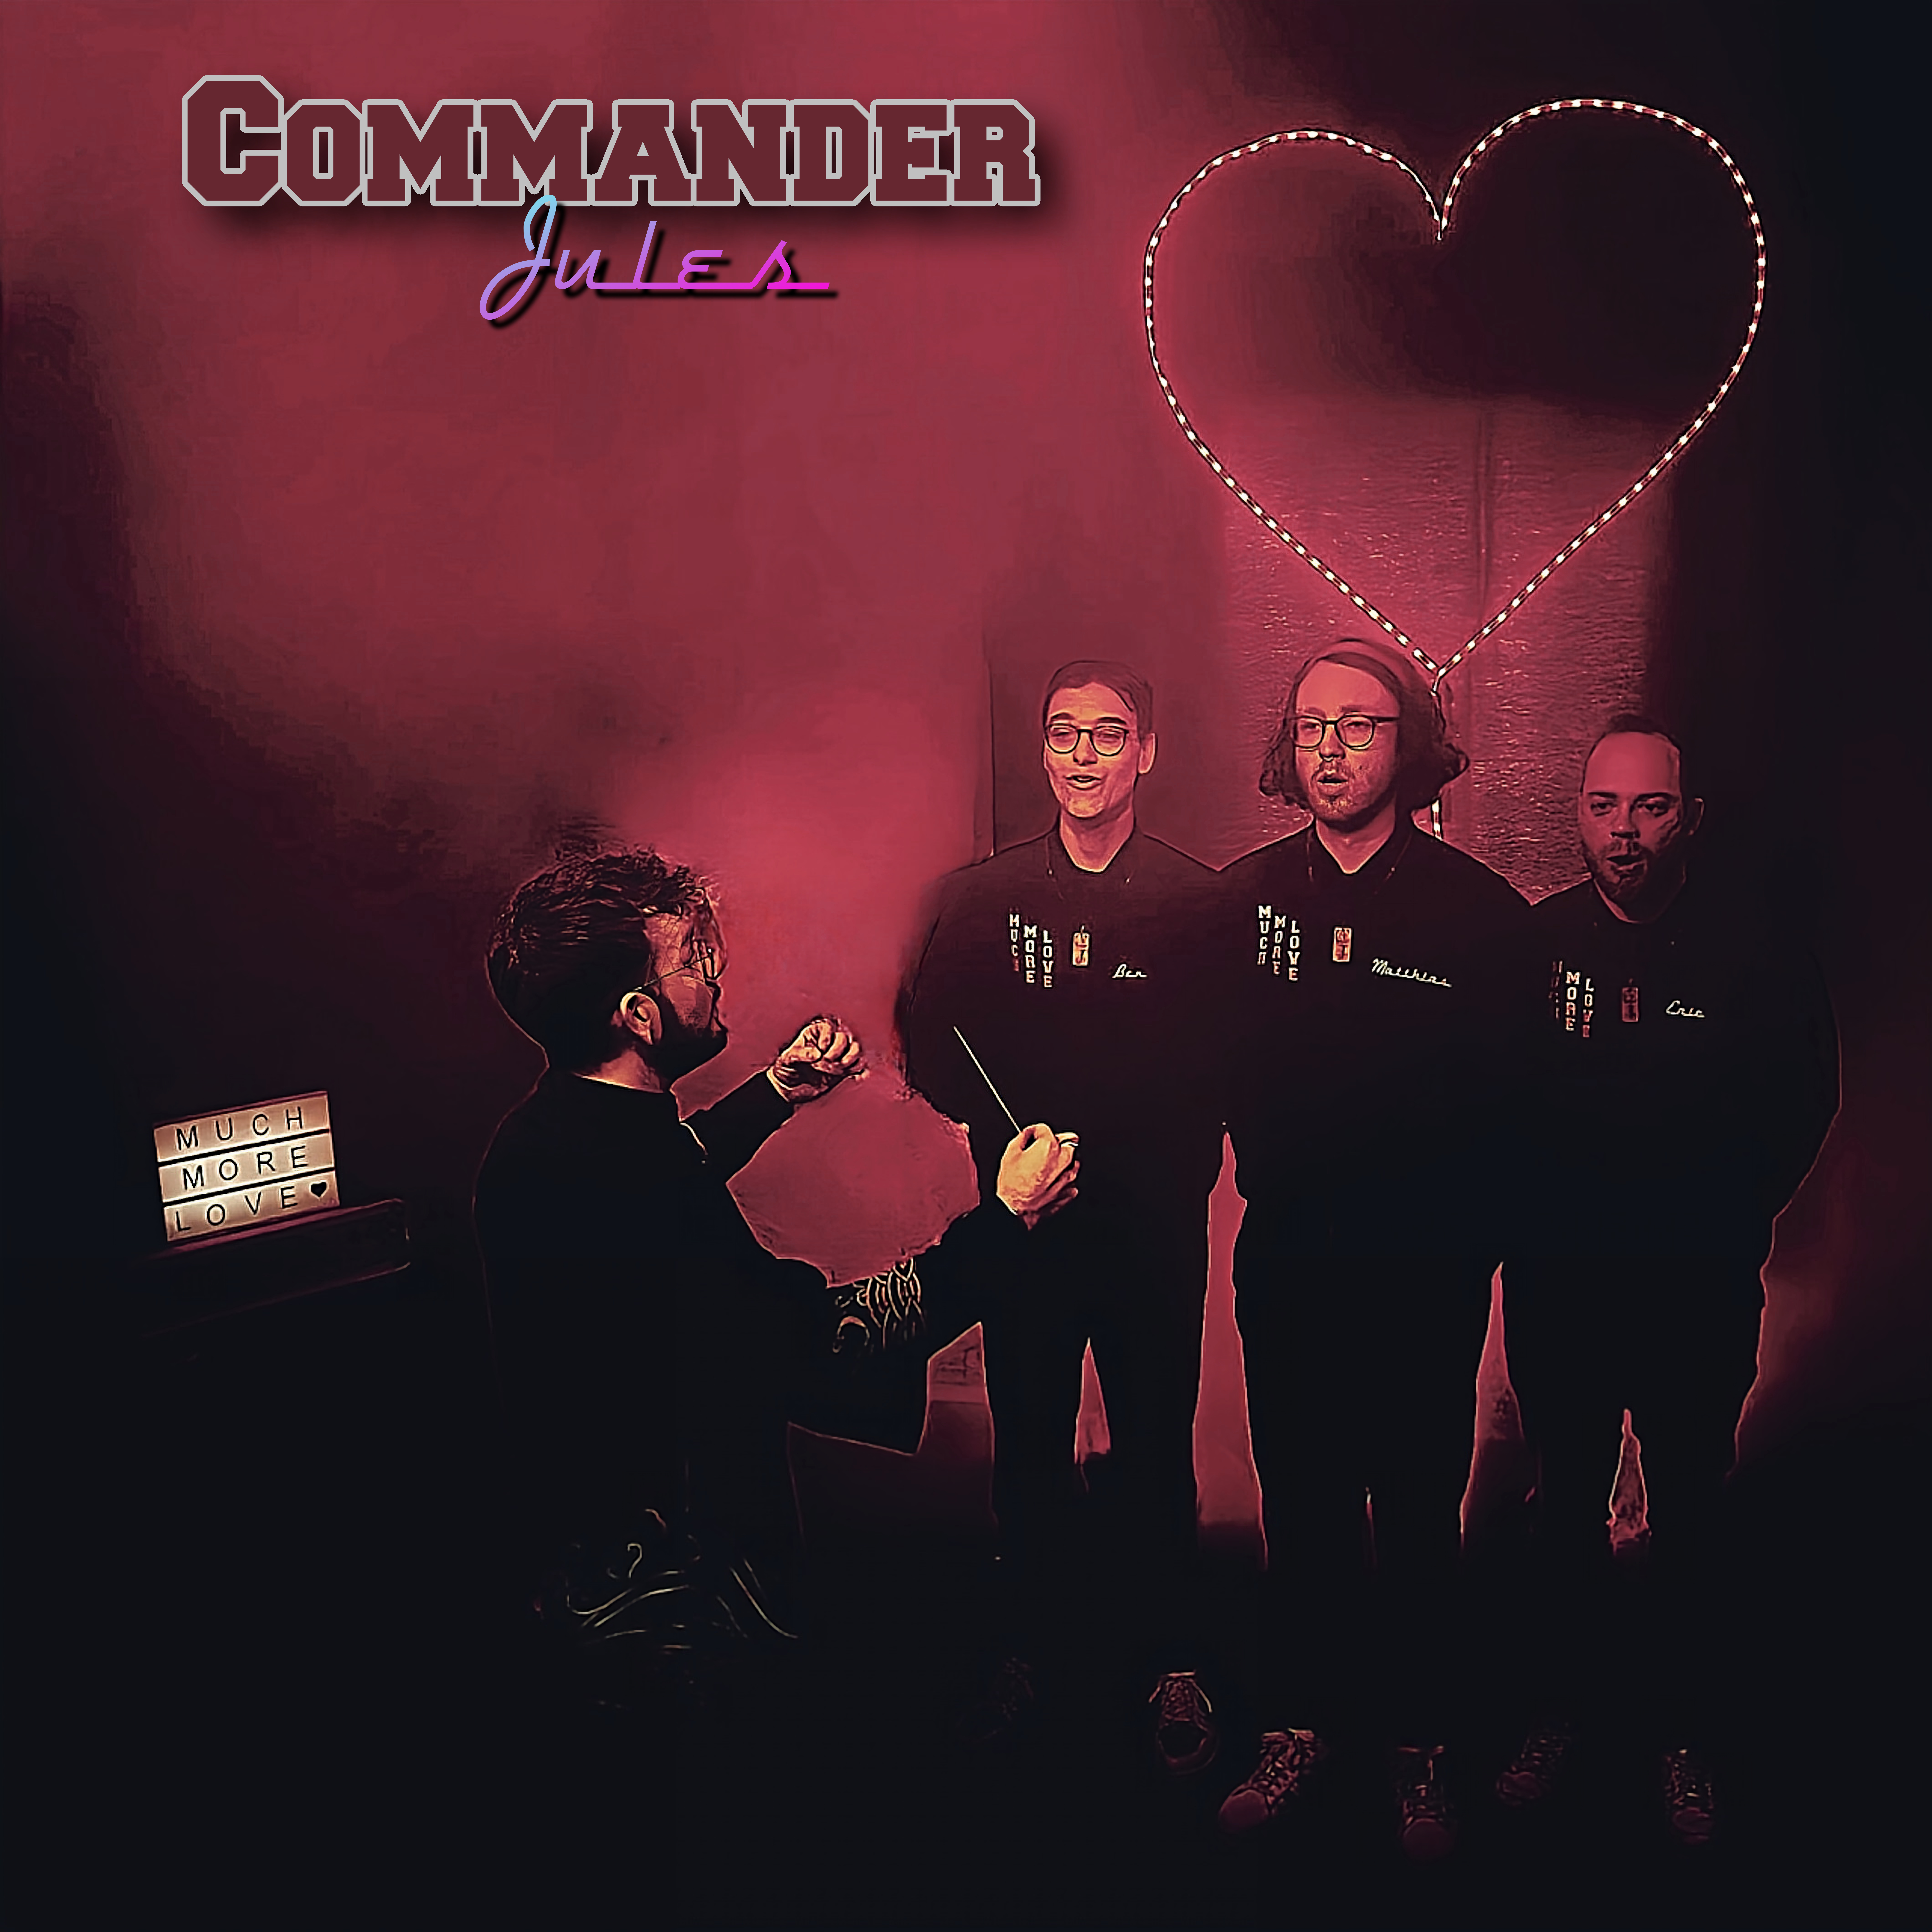 MUCH MORE LOVE EP COVER COMMANDER JULES